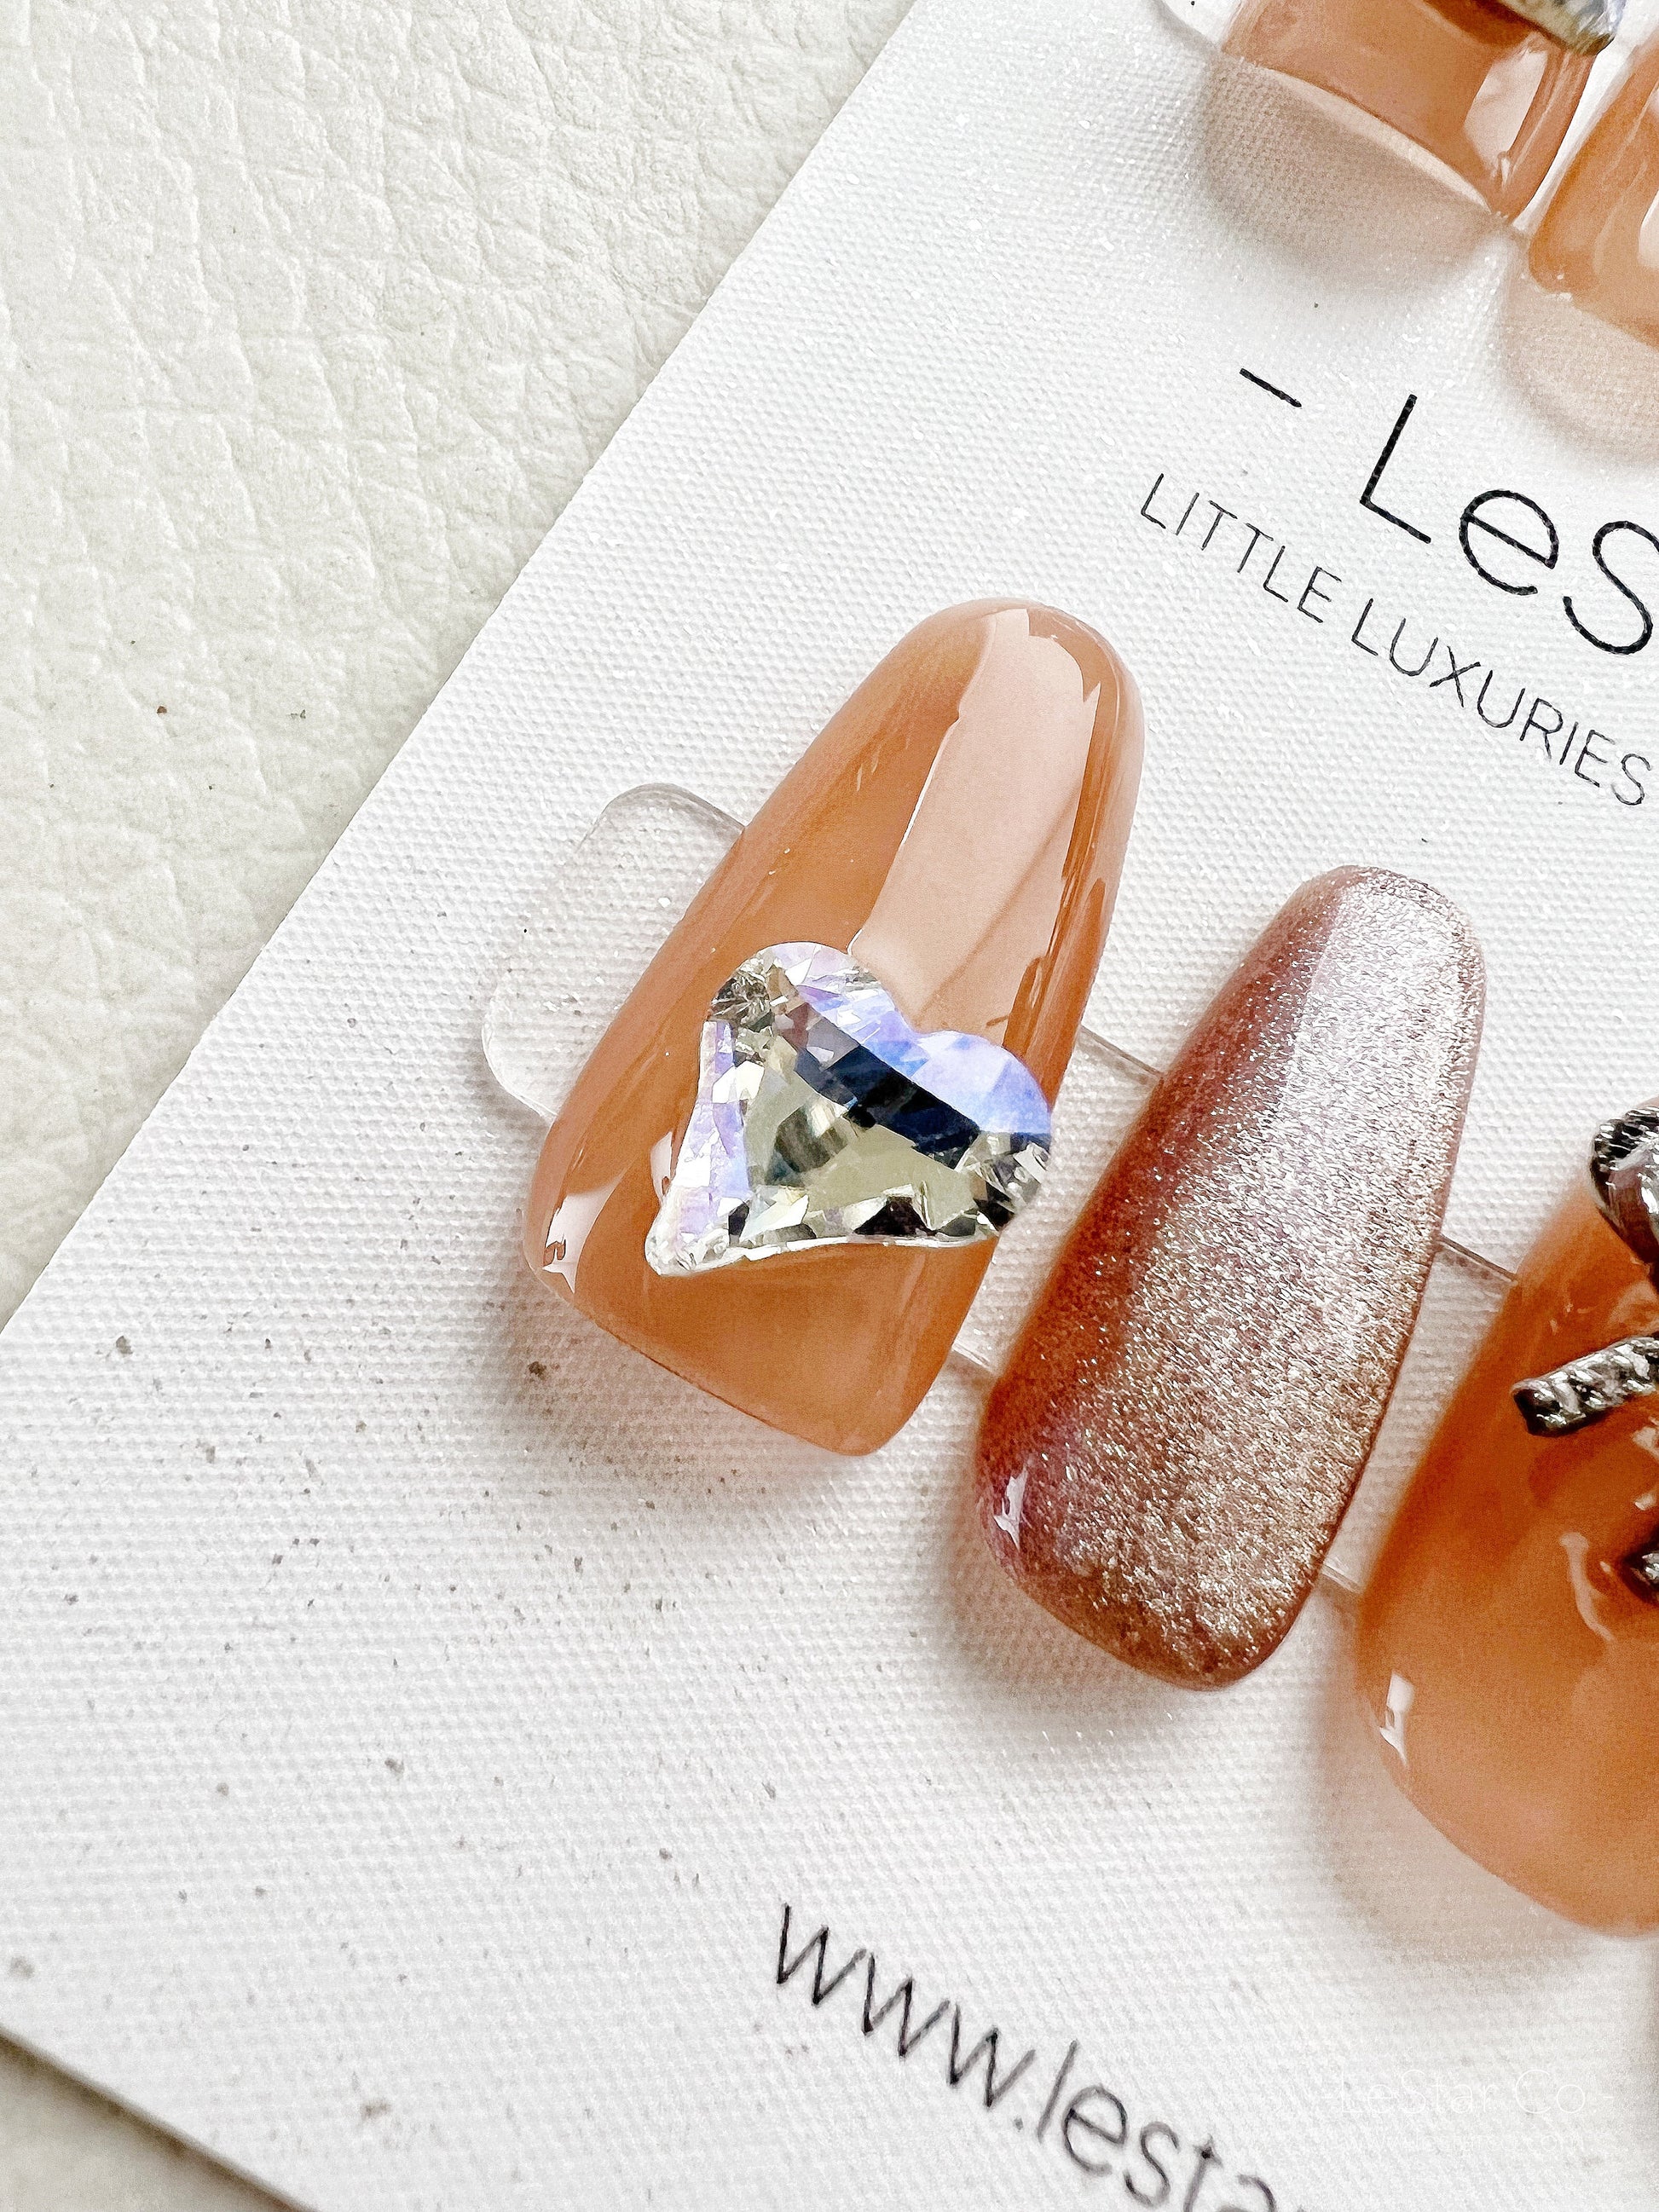 Gold Gem Press on Nails, Gems and Gold Glitter